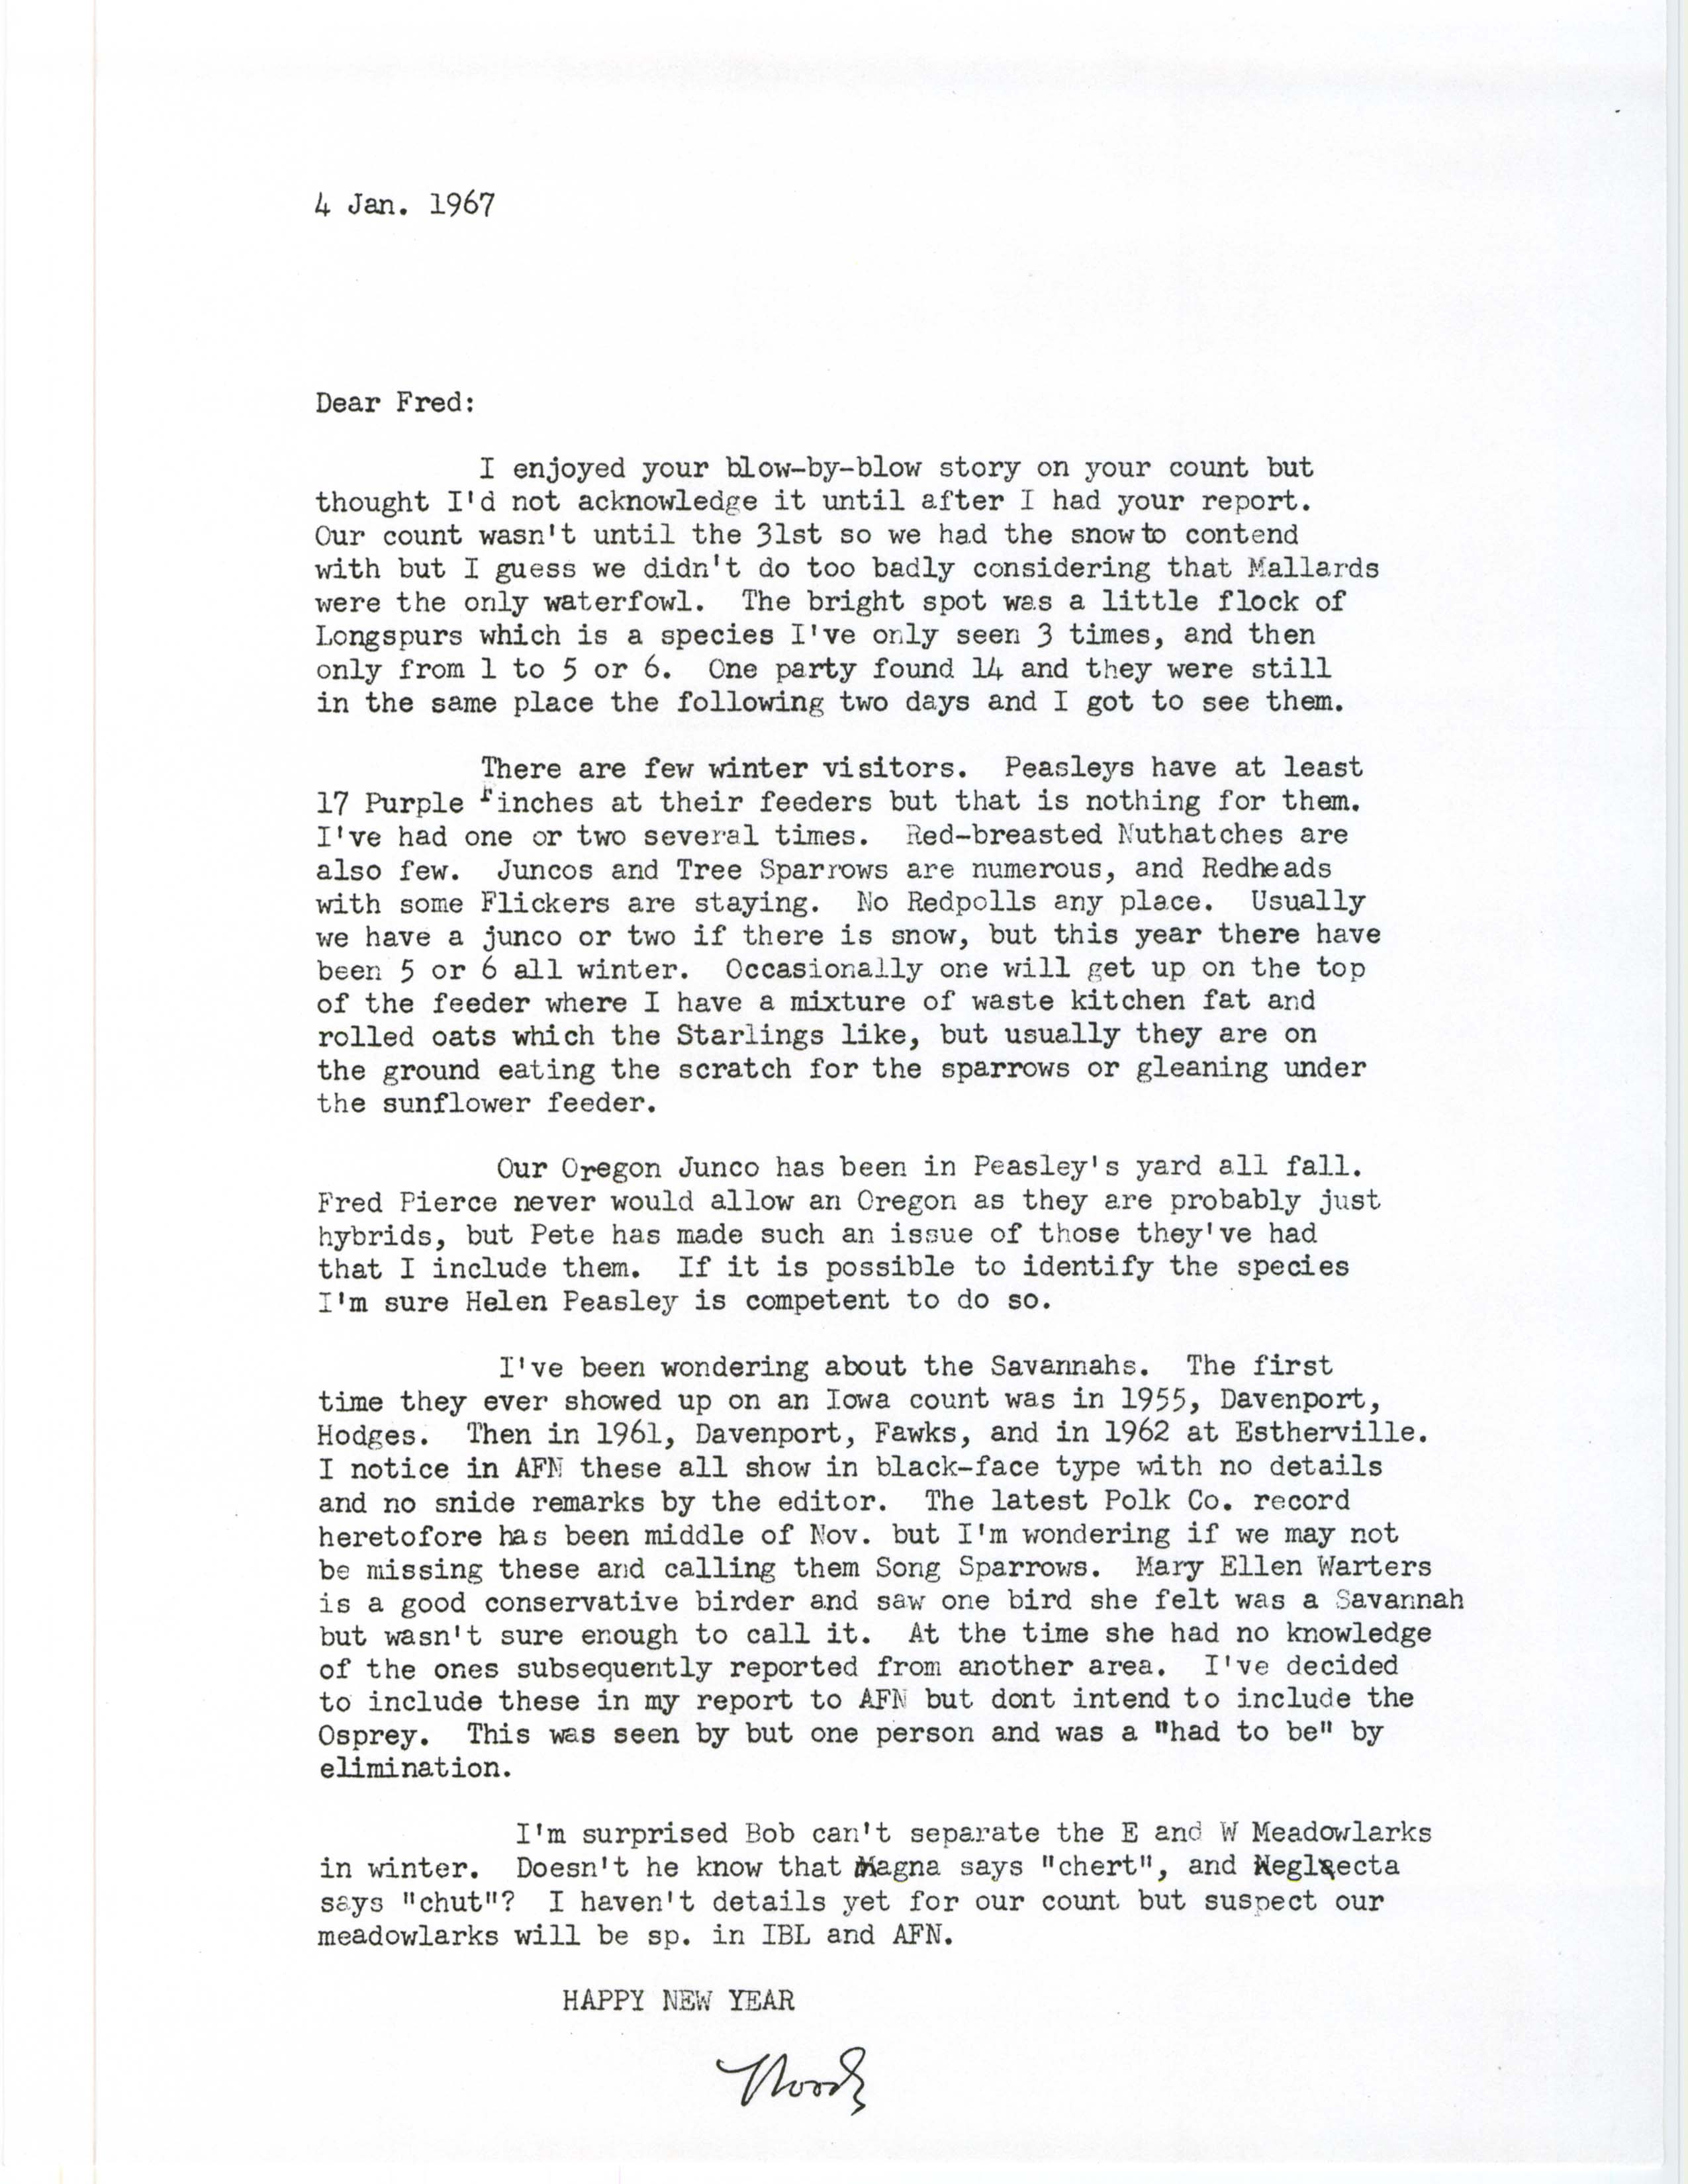 Woodward H. Brown letter to Fred Kent about birding sightings for the fall and winter of 1966 and a Christmas Bird Count, January 4, 1967